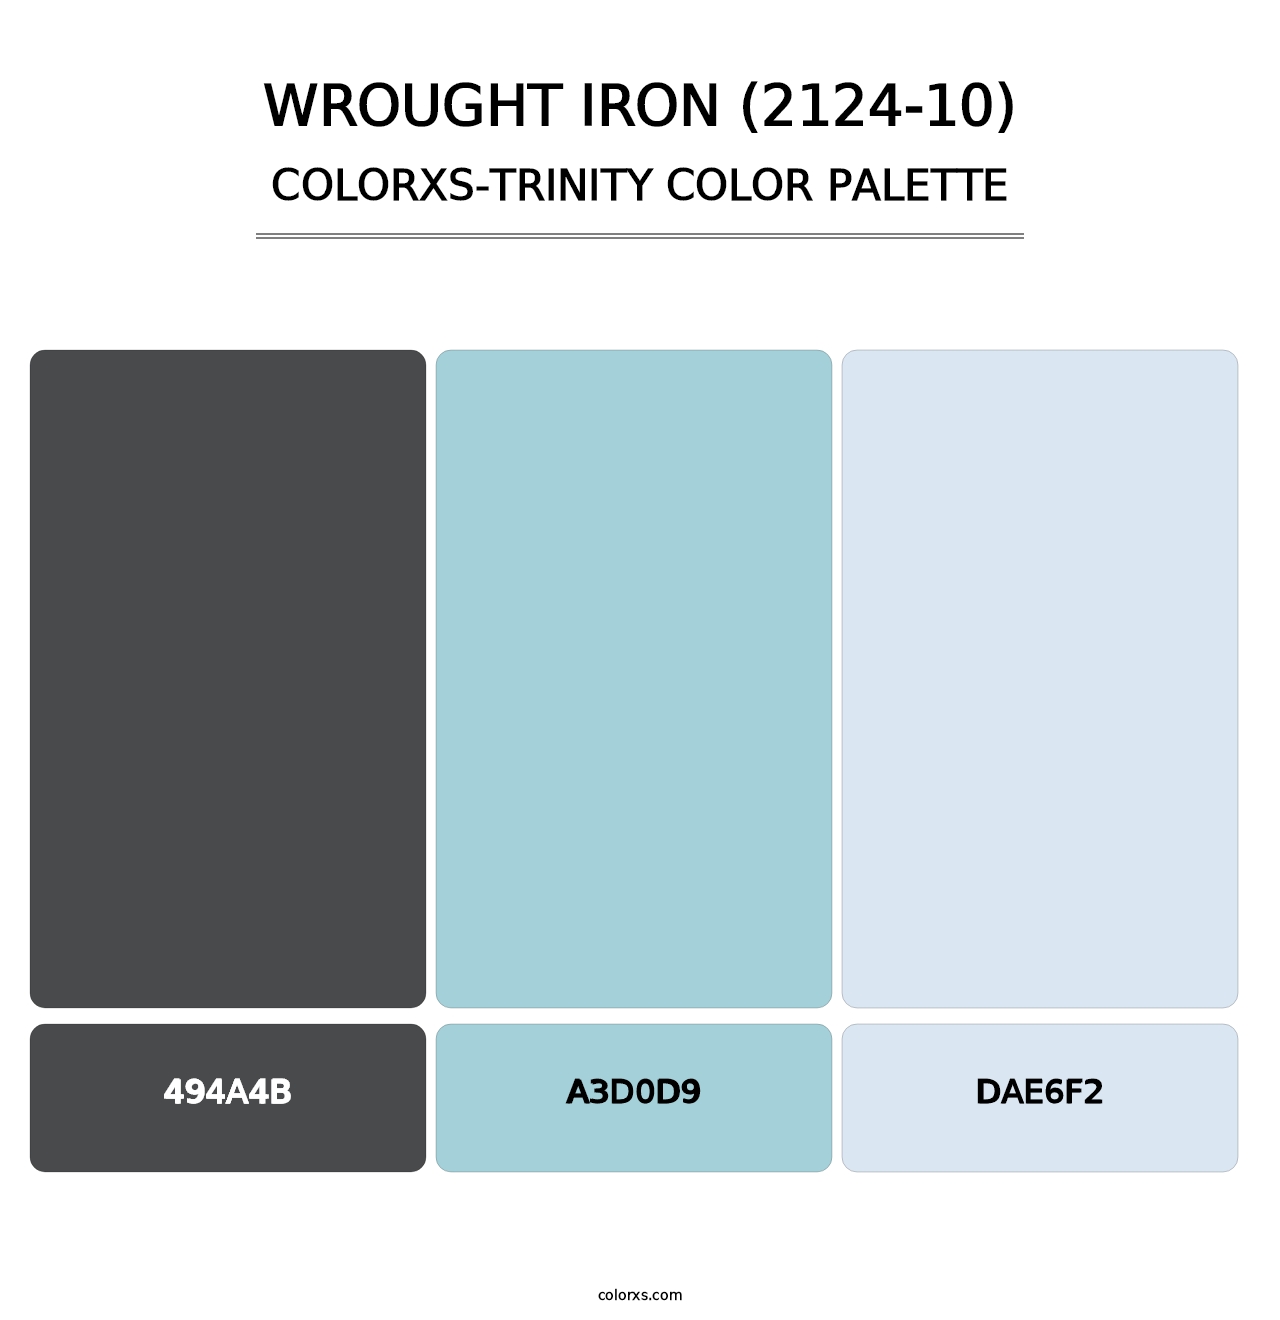 Wrought Iron (2124-10) - Colorxs Trinity Palette